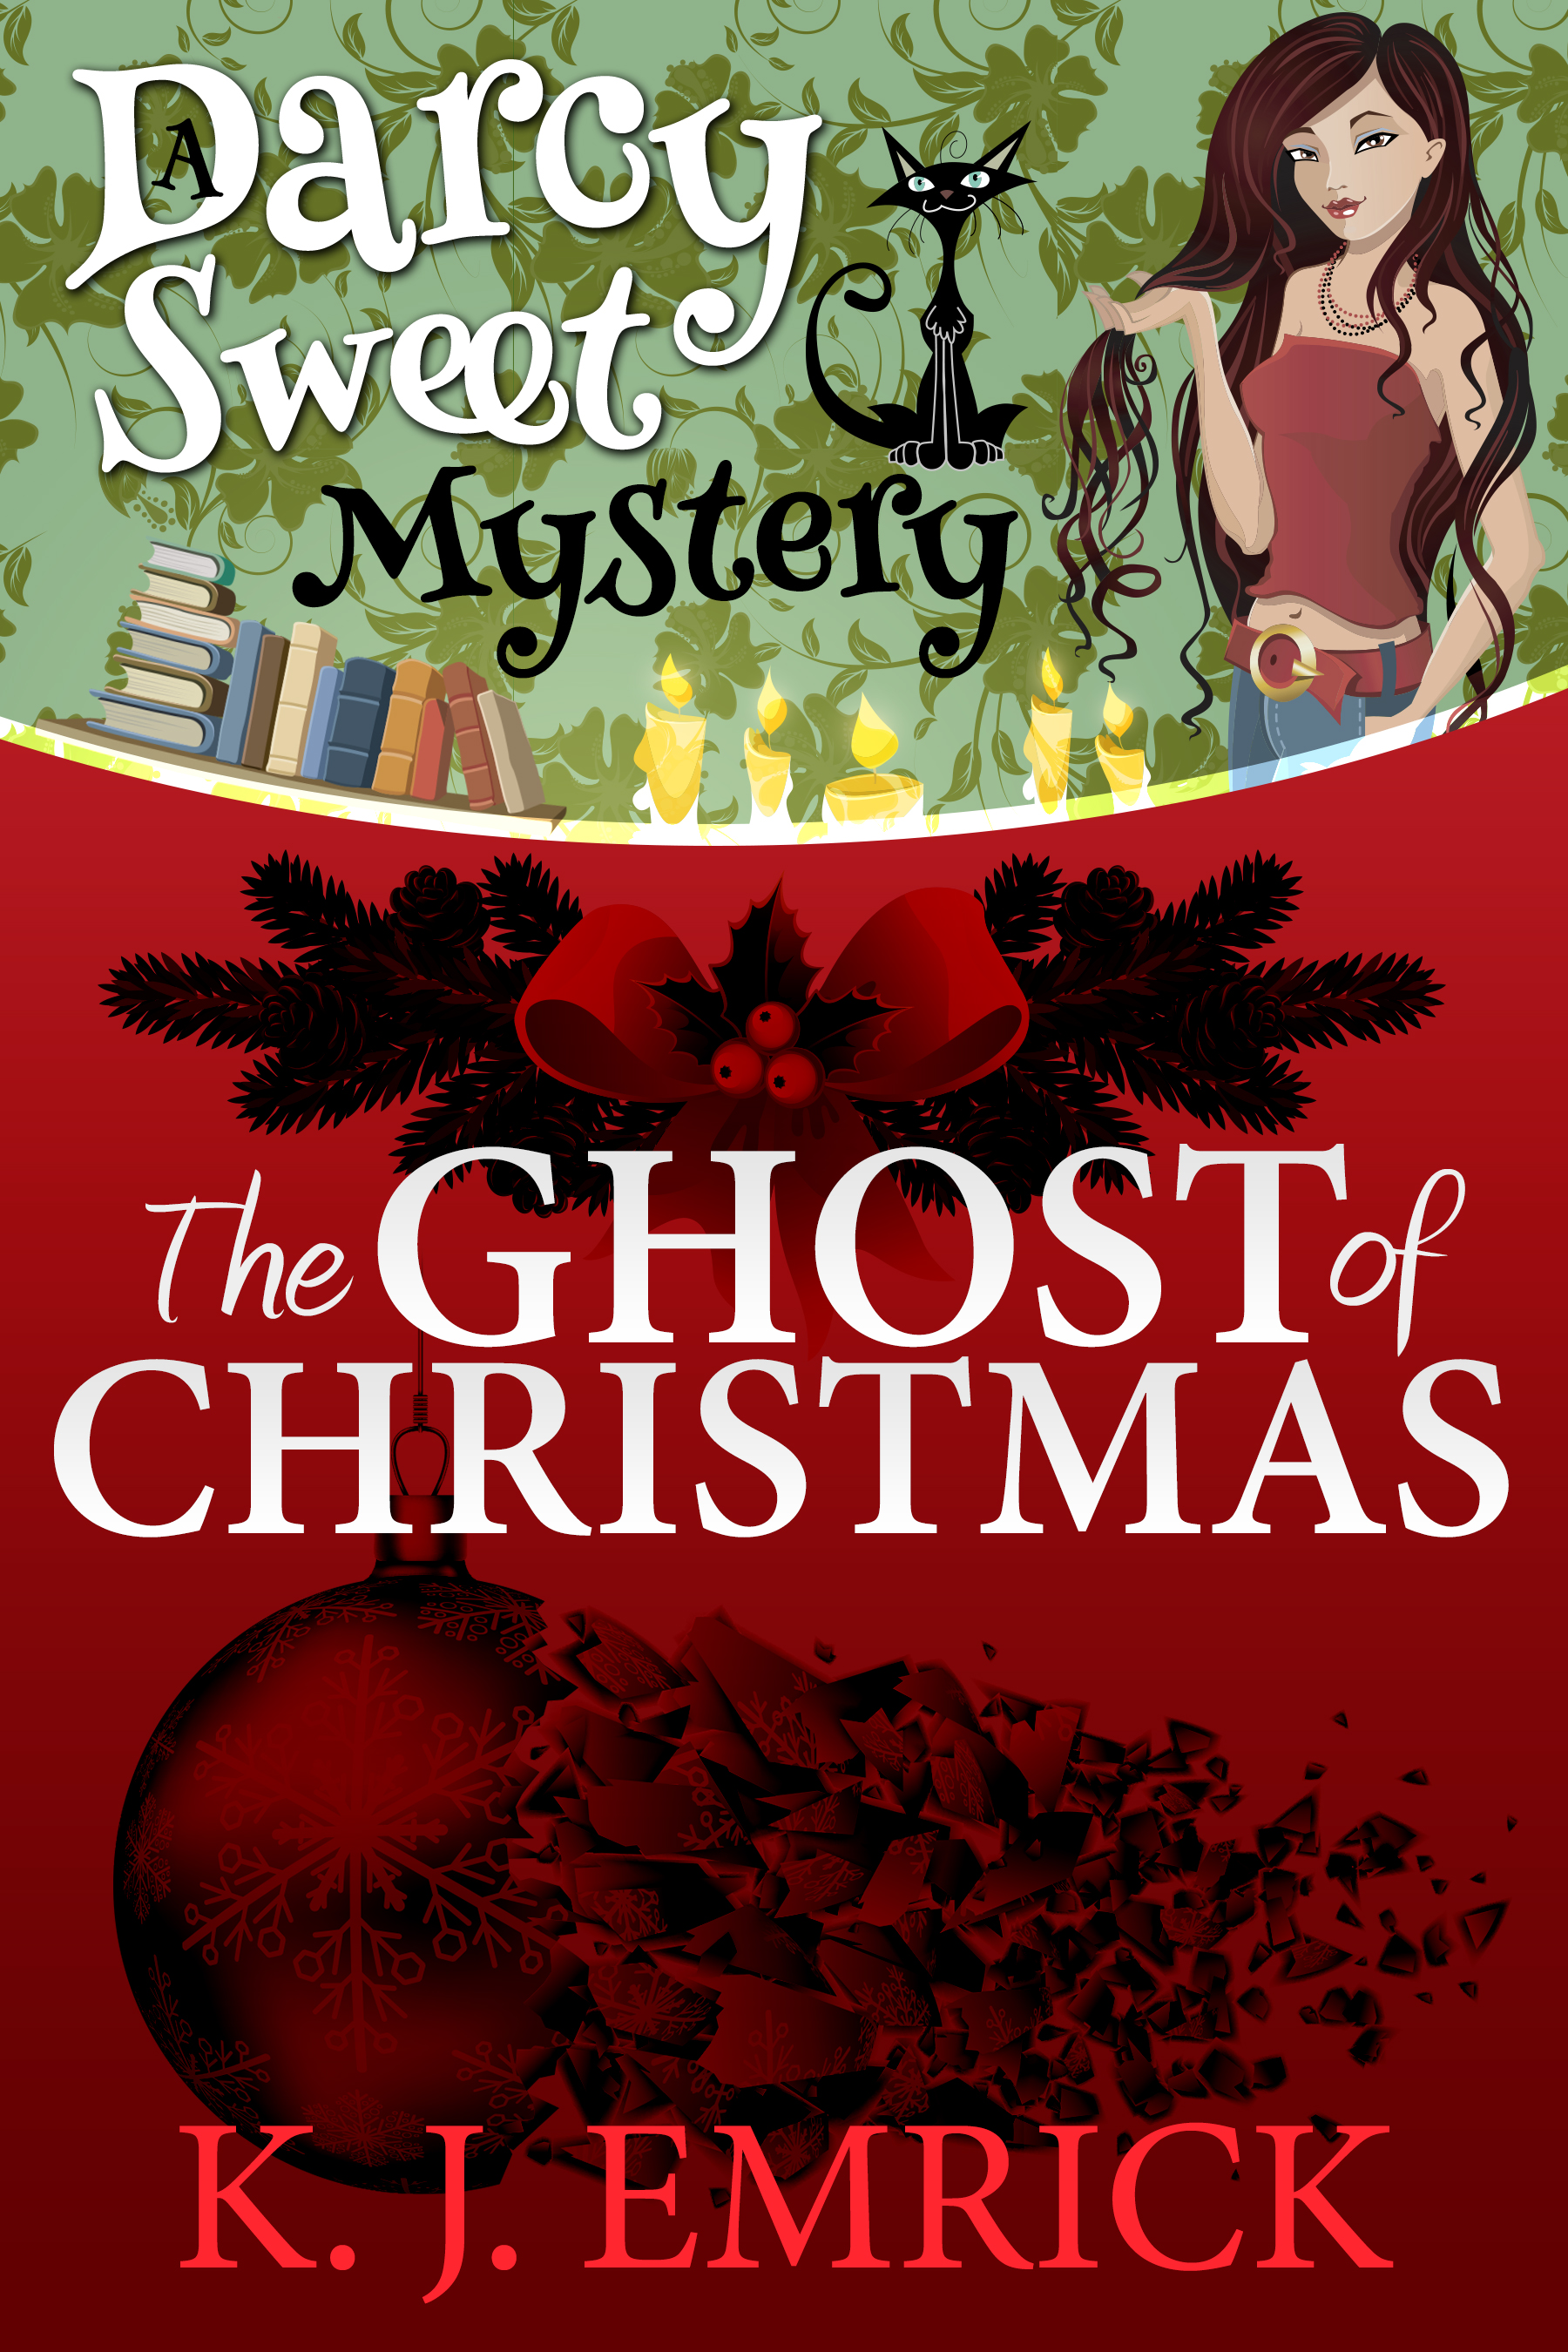 The Ghost of Christmas - A Darcy Sweet Mystery